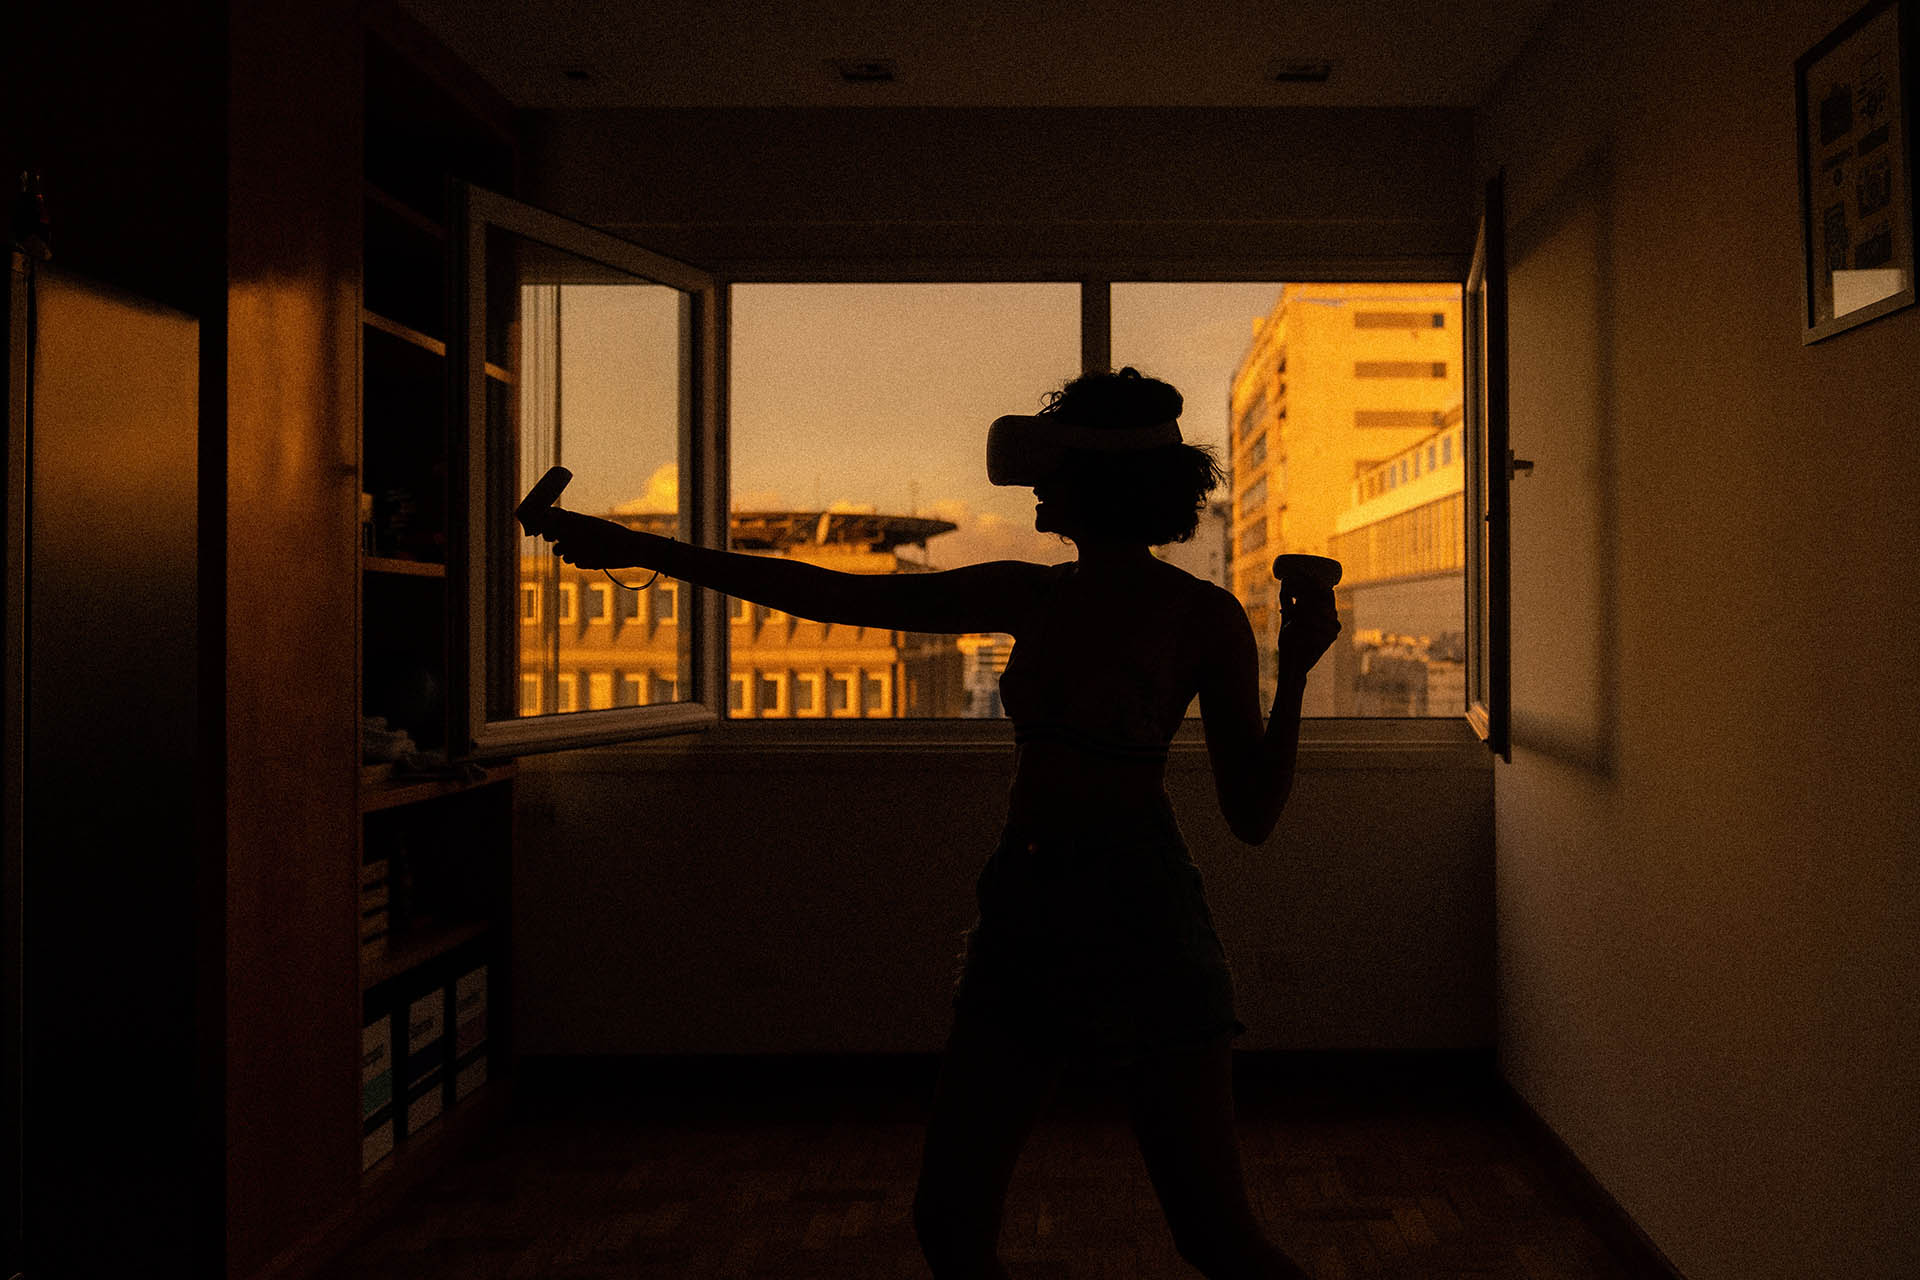 A woman standing in what seems to be here flat wearing a virtual reality device. In the background you can see through a window and get a glimpse of neighbour buildings.